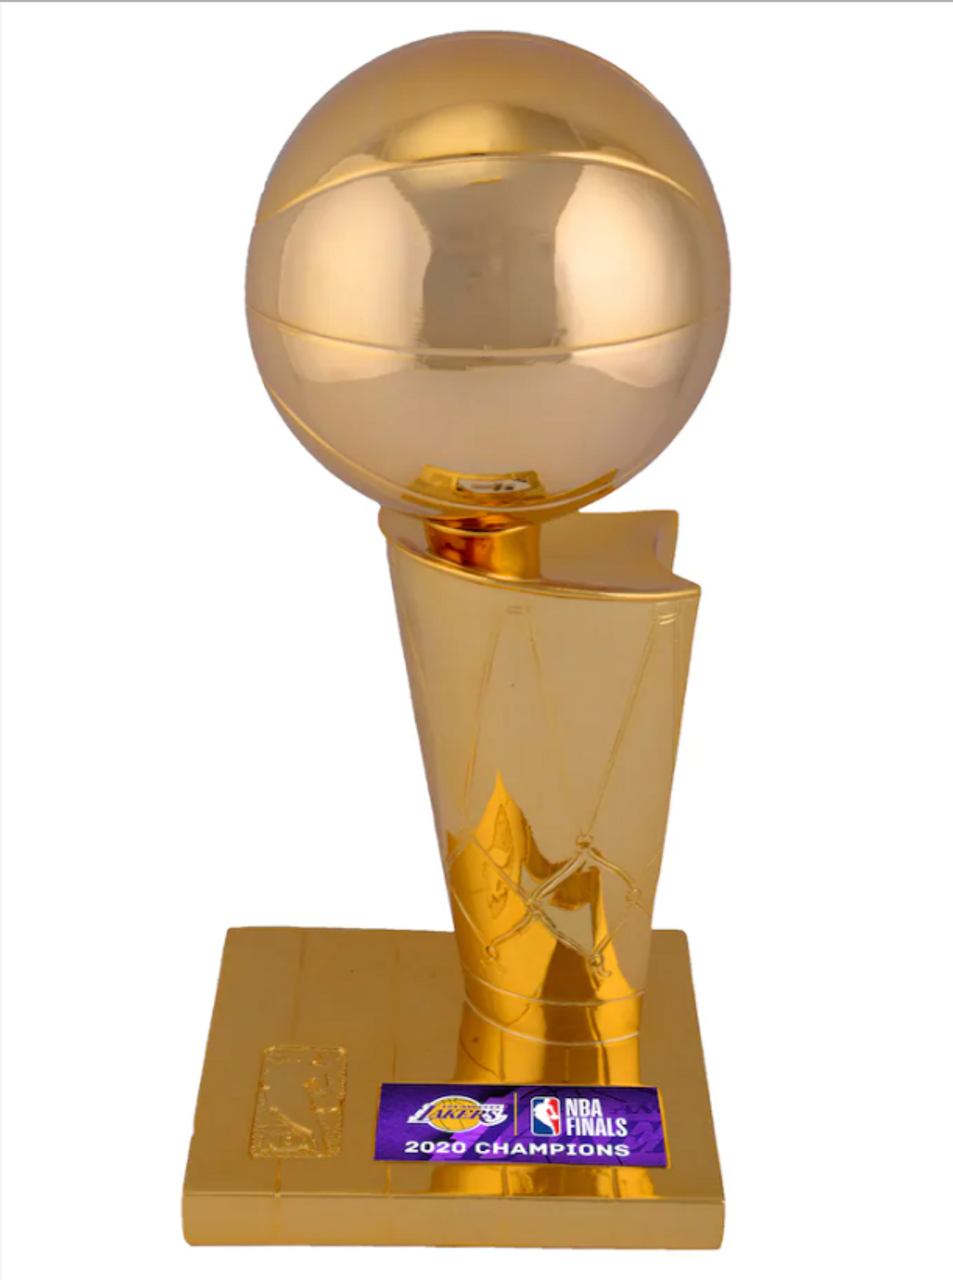 The amount of slander the Lakers get for their 2020 Championship is unreal  🏀🏆 Bubble or not, a ring is a ring. Which other teams would get the same  level of criticism